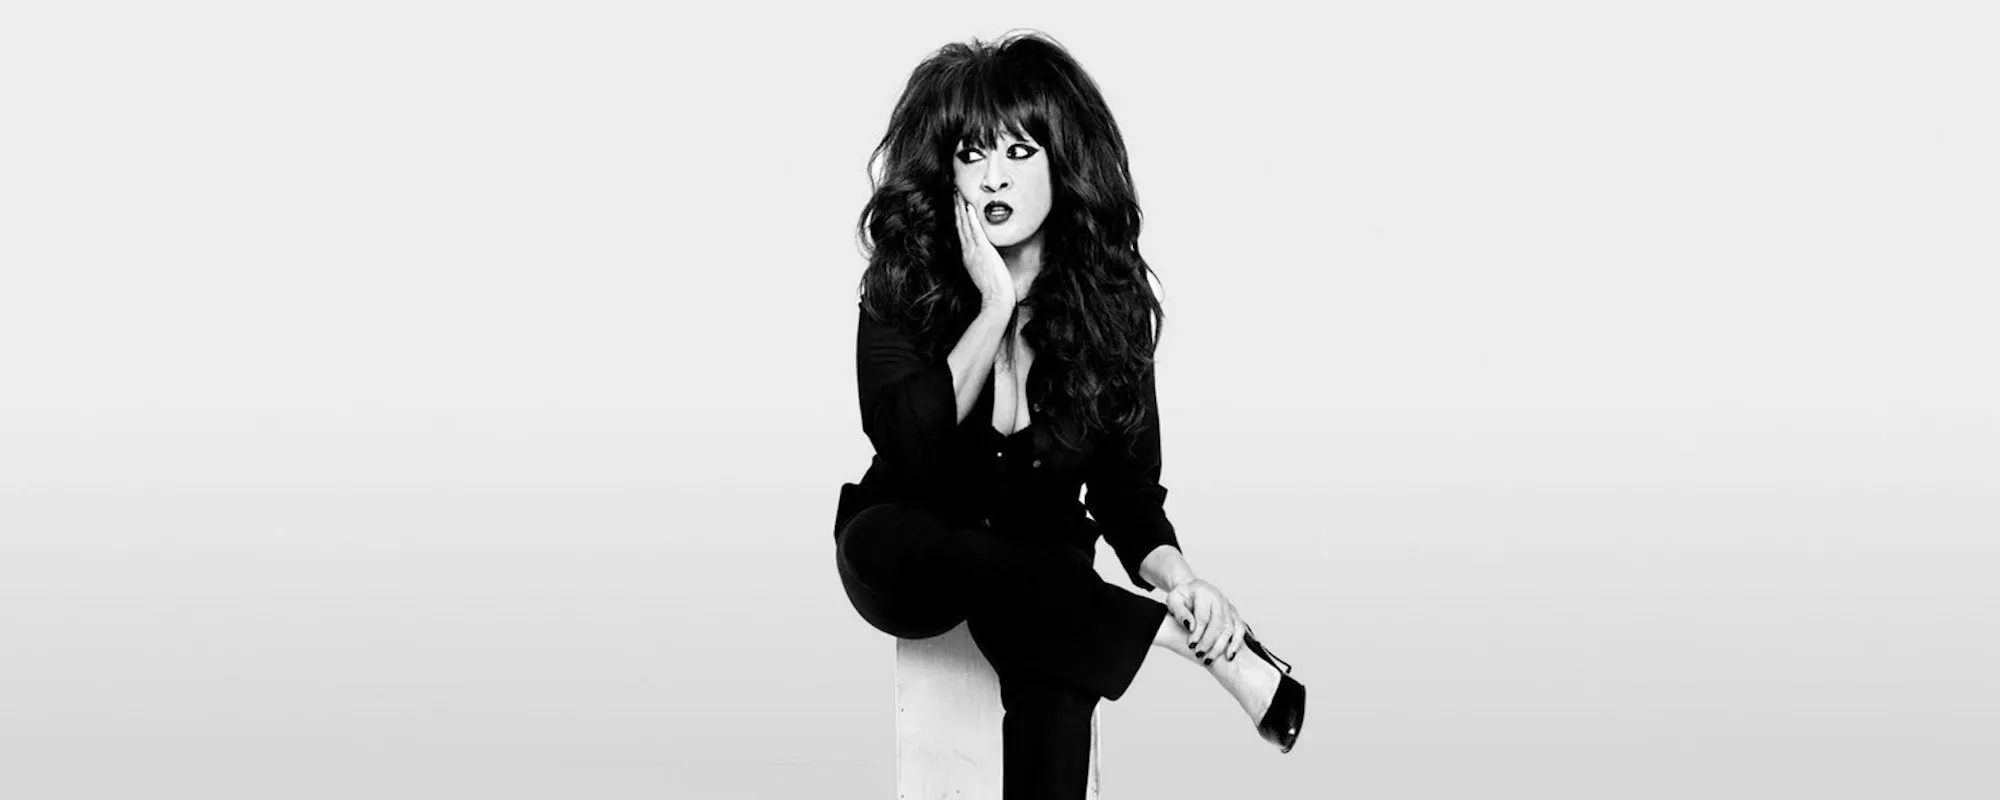 Behind the Song Lyrics: “Be My Baby,” Performed by Ronnie Spector and The Ronettes